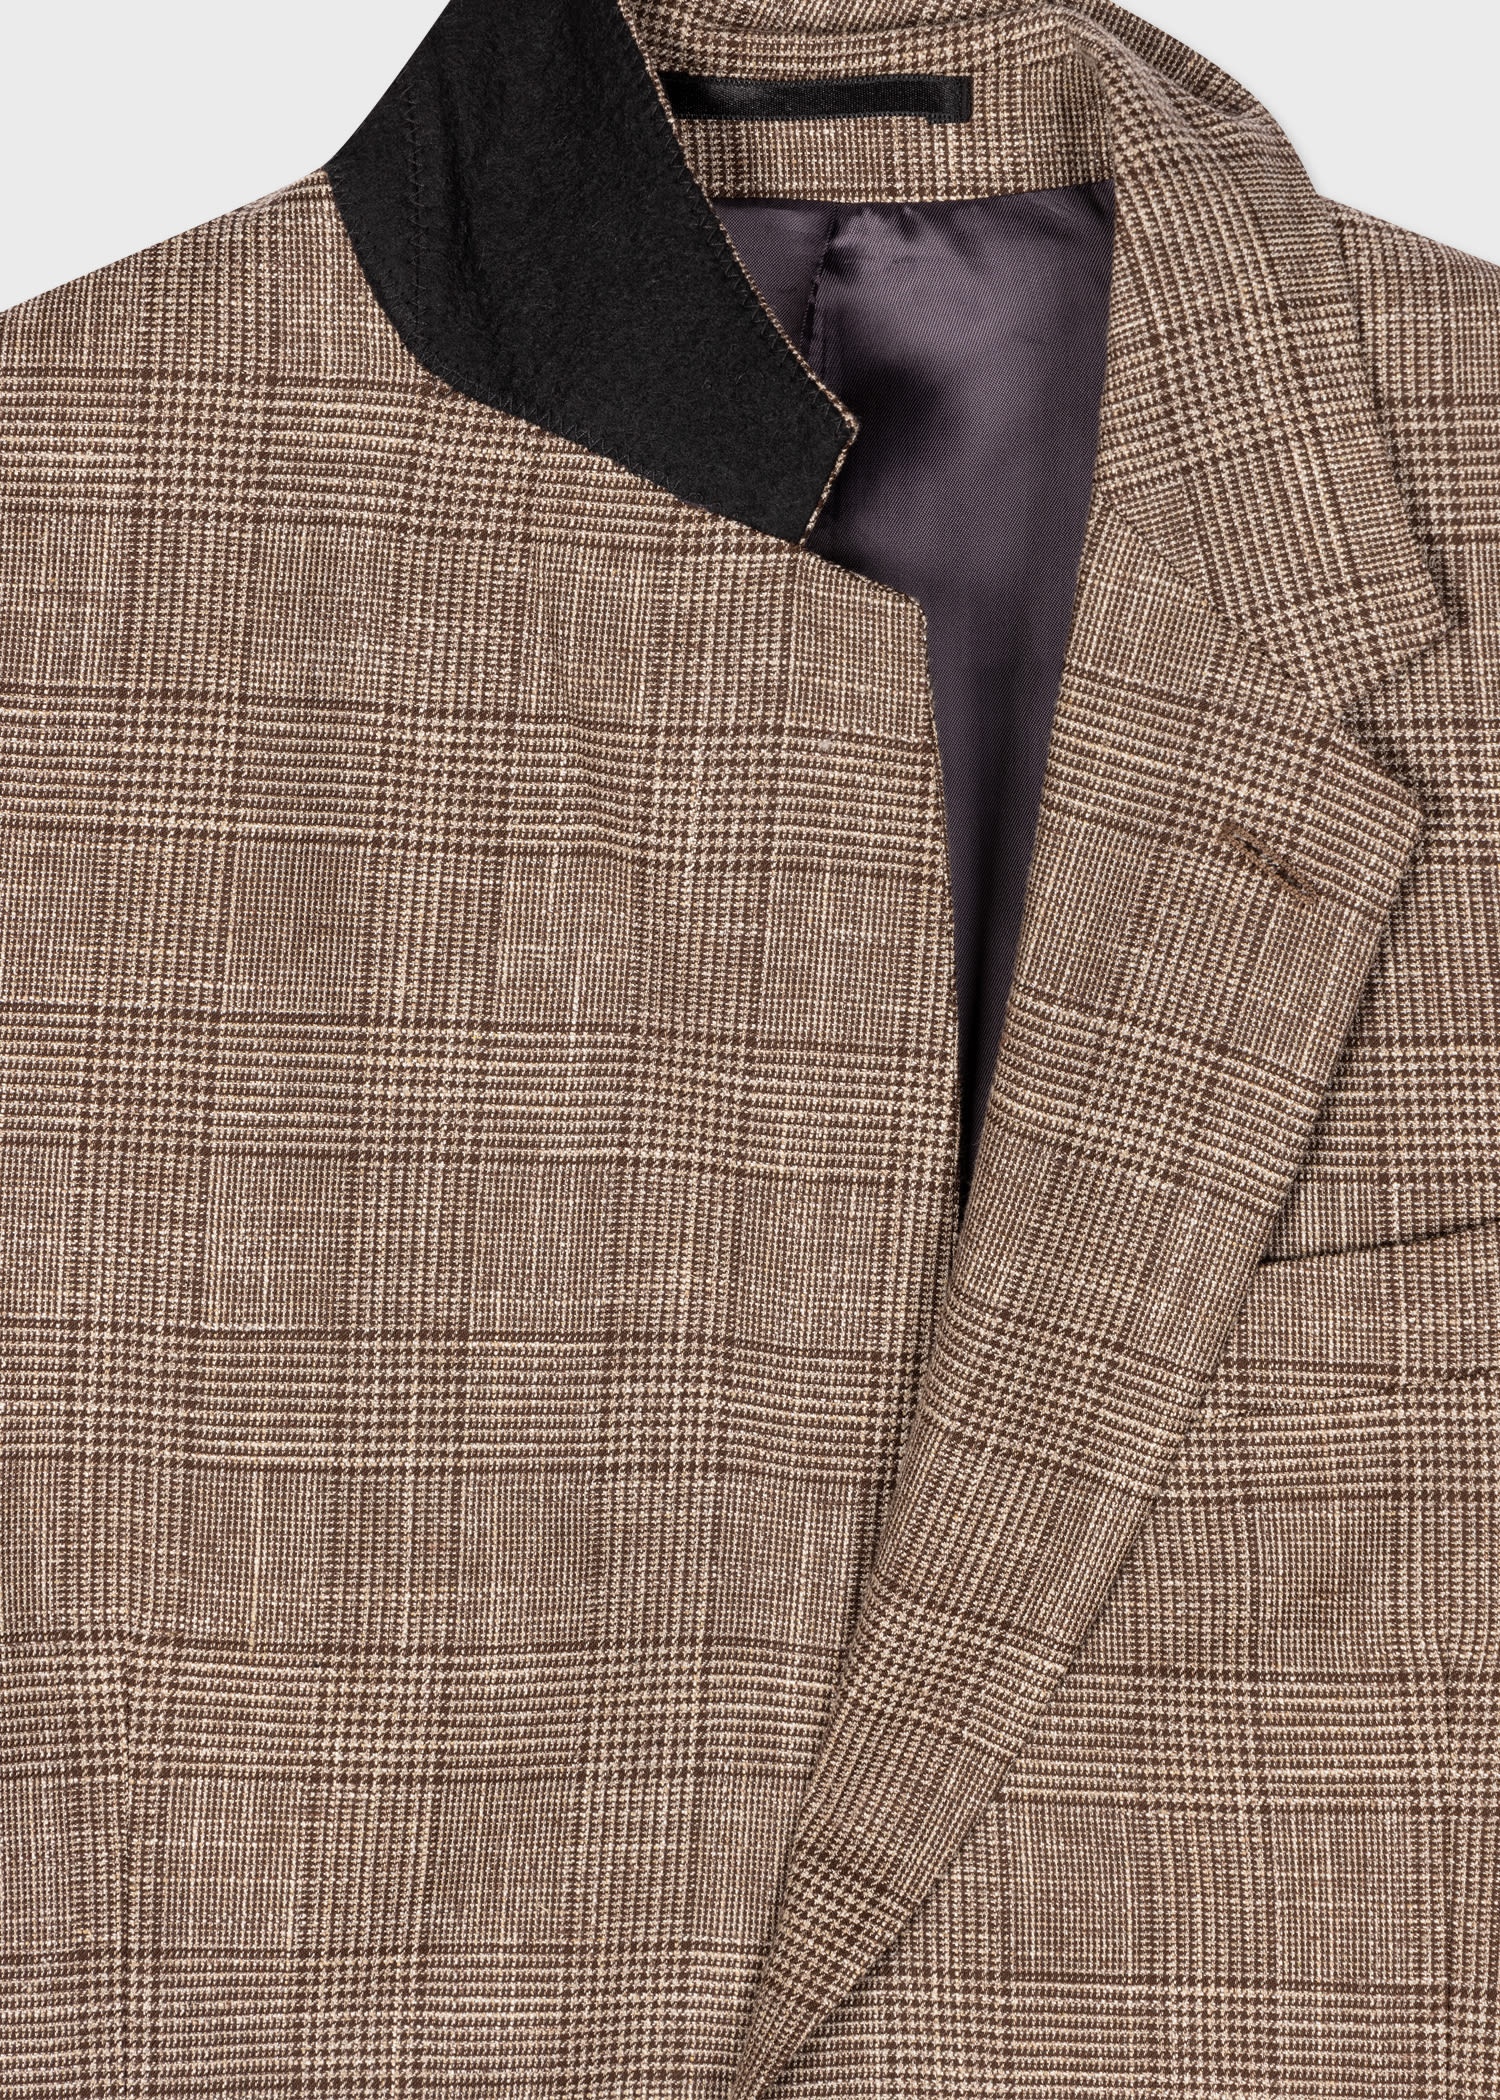 Houndstooth Check Wool-Linen Suit - 5